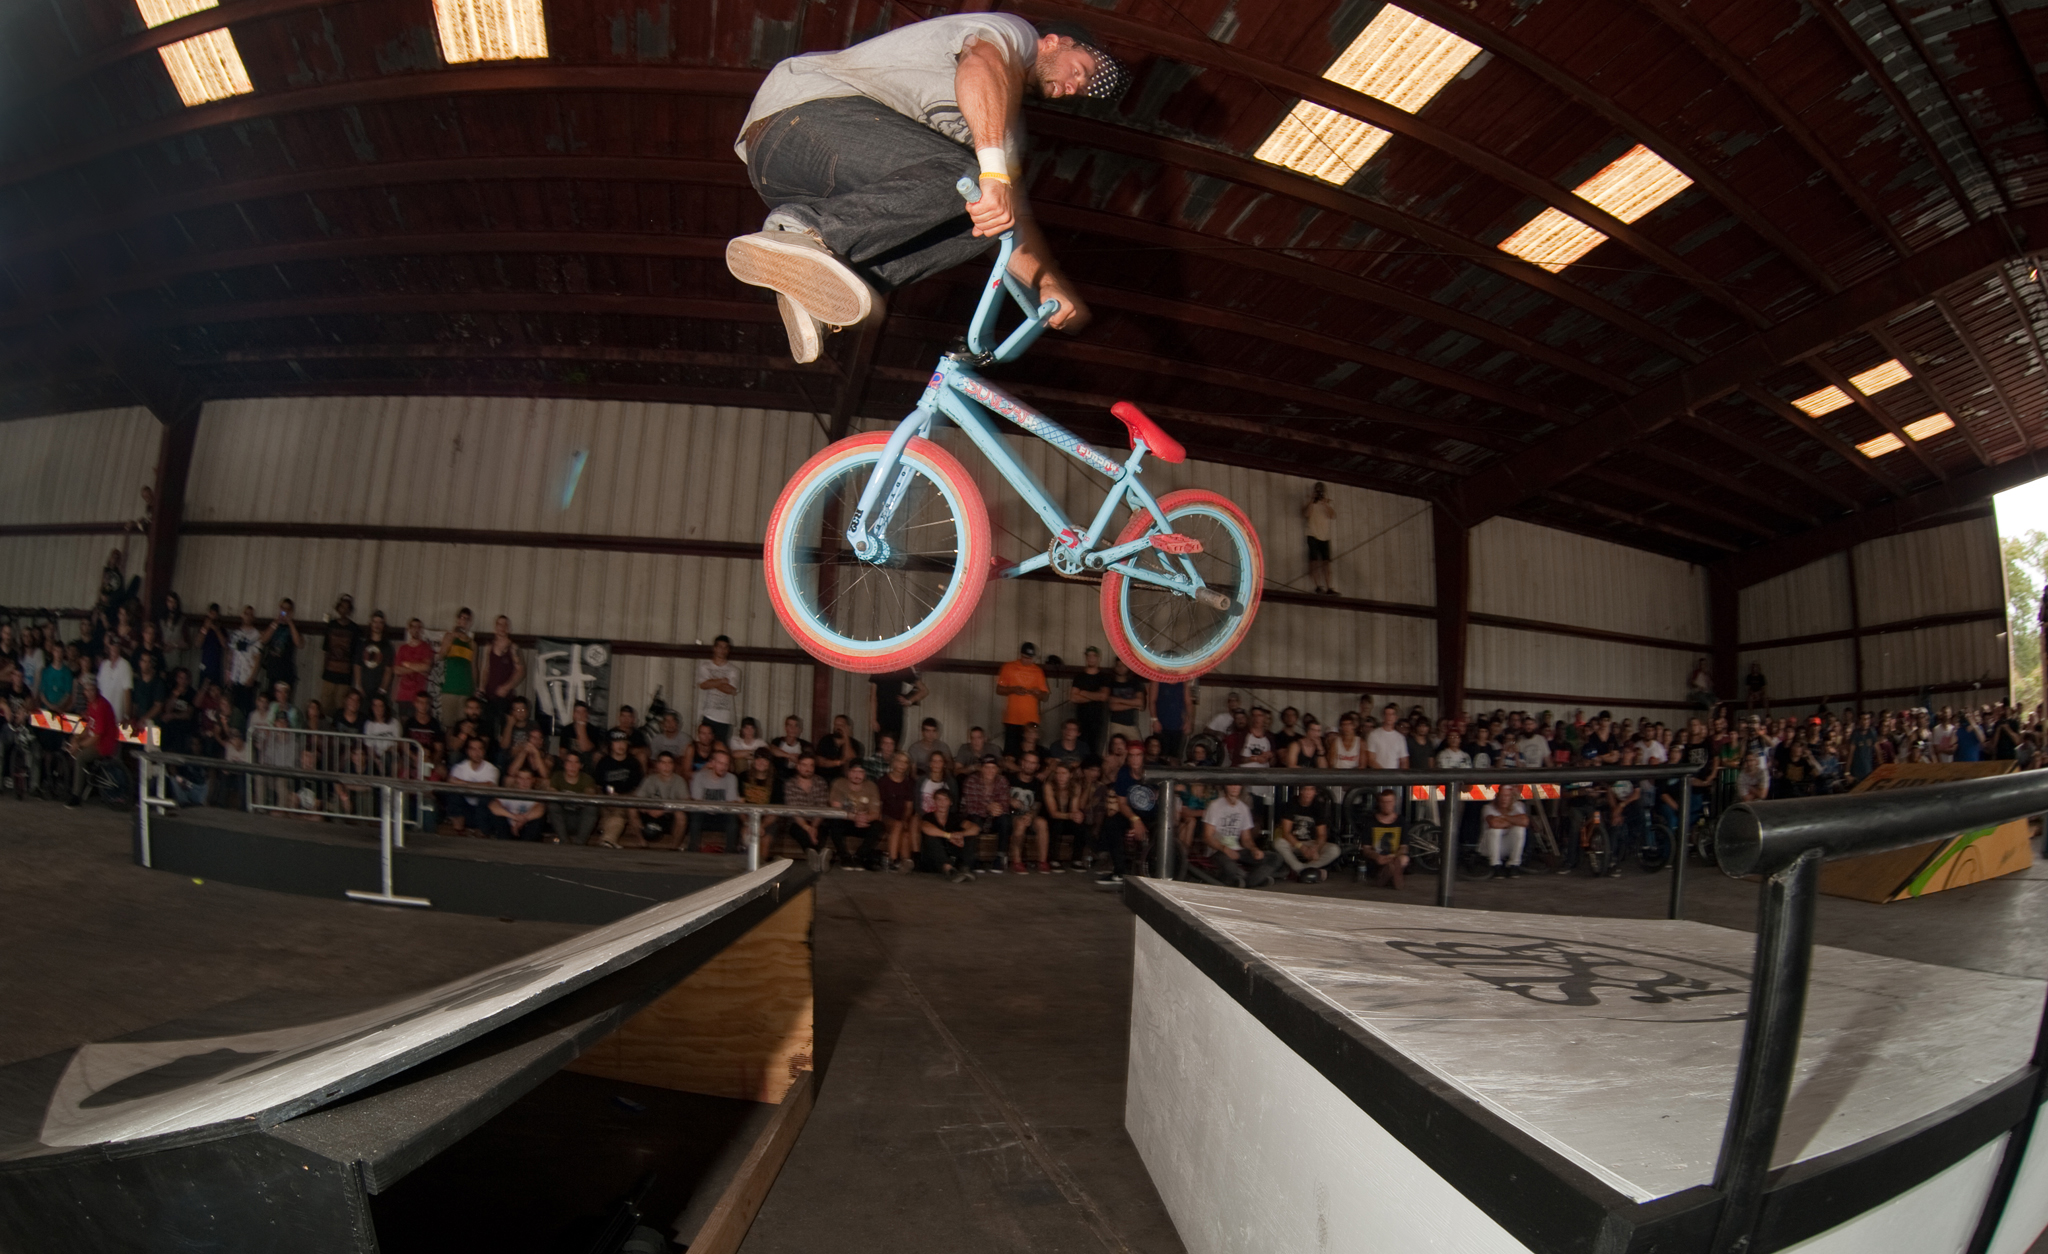 Texas Toast and BMX street with Aaron Ross.